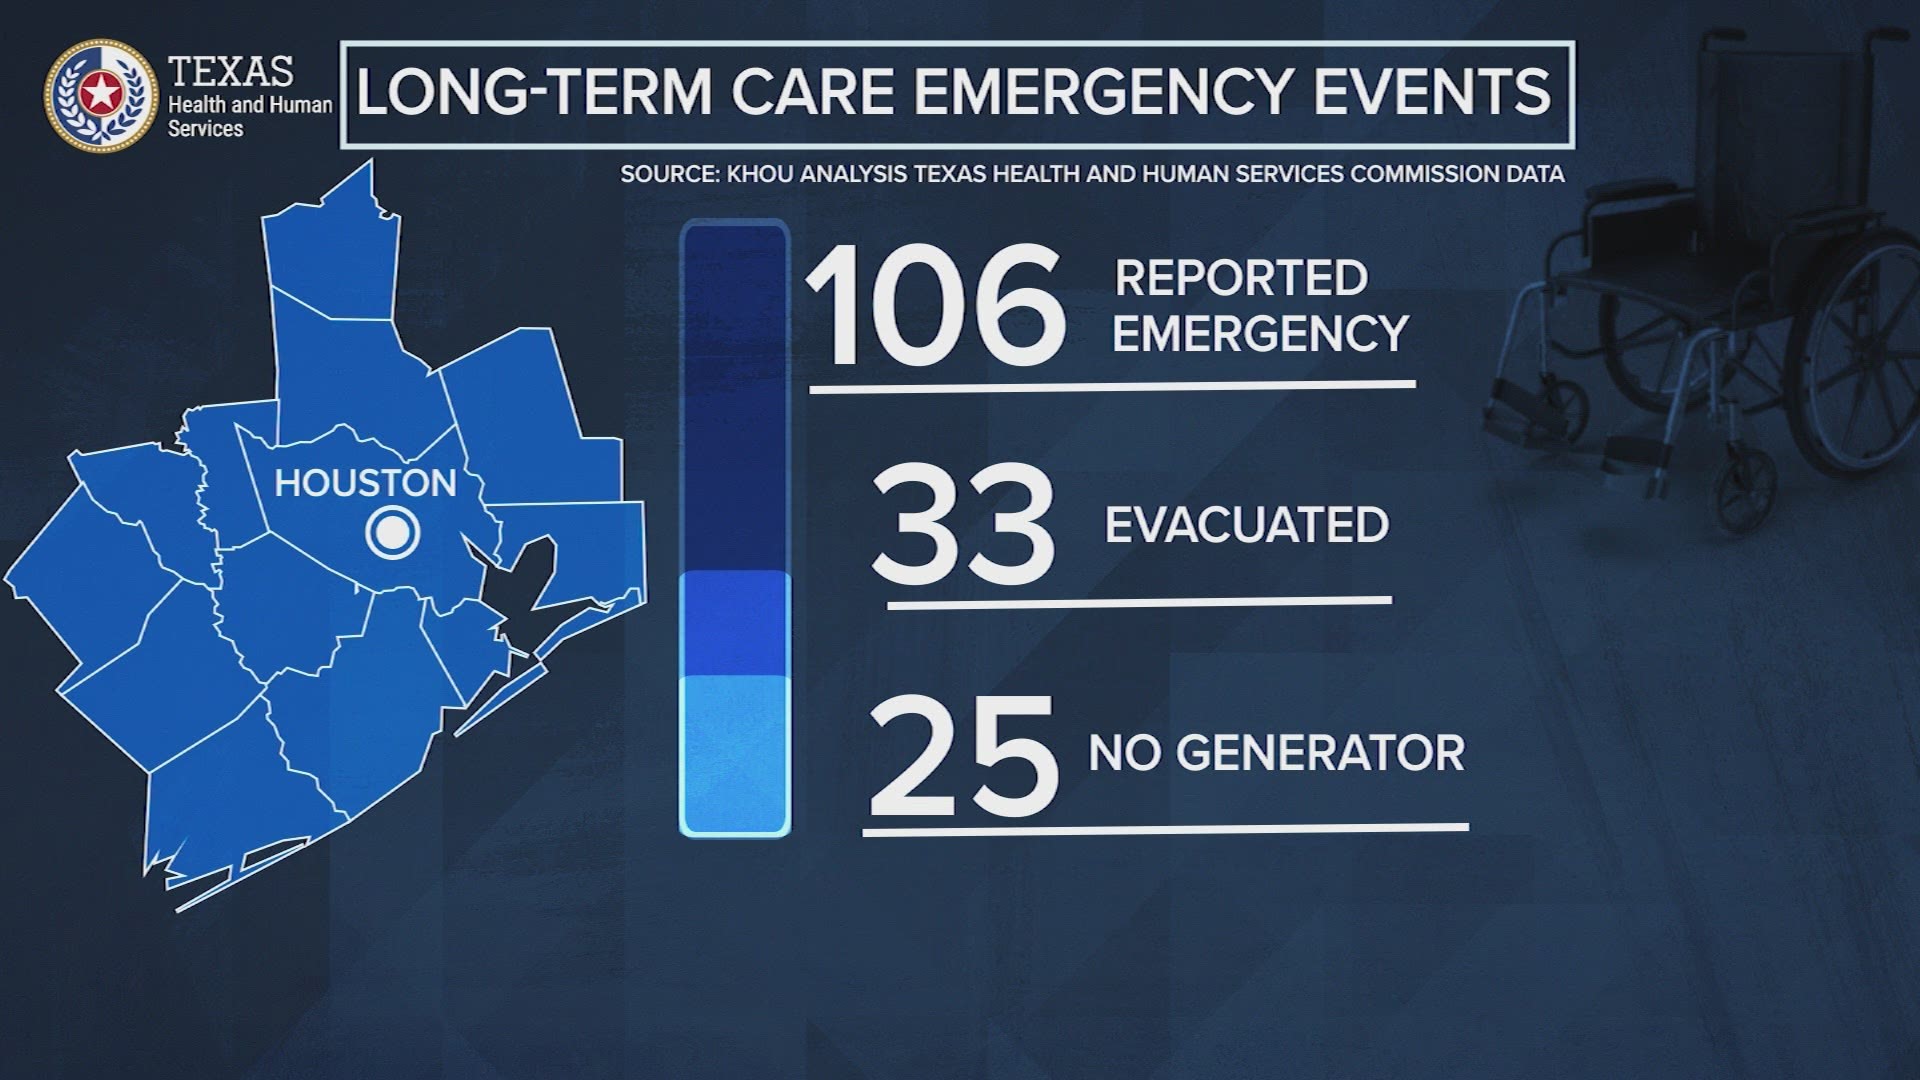 More than 100 Houston-area long-term care facilities reported emergencies to the state during last week’s winter storm, and some were forced to evacuate.